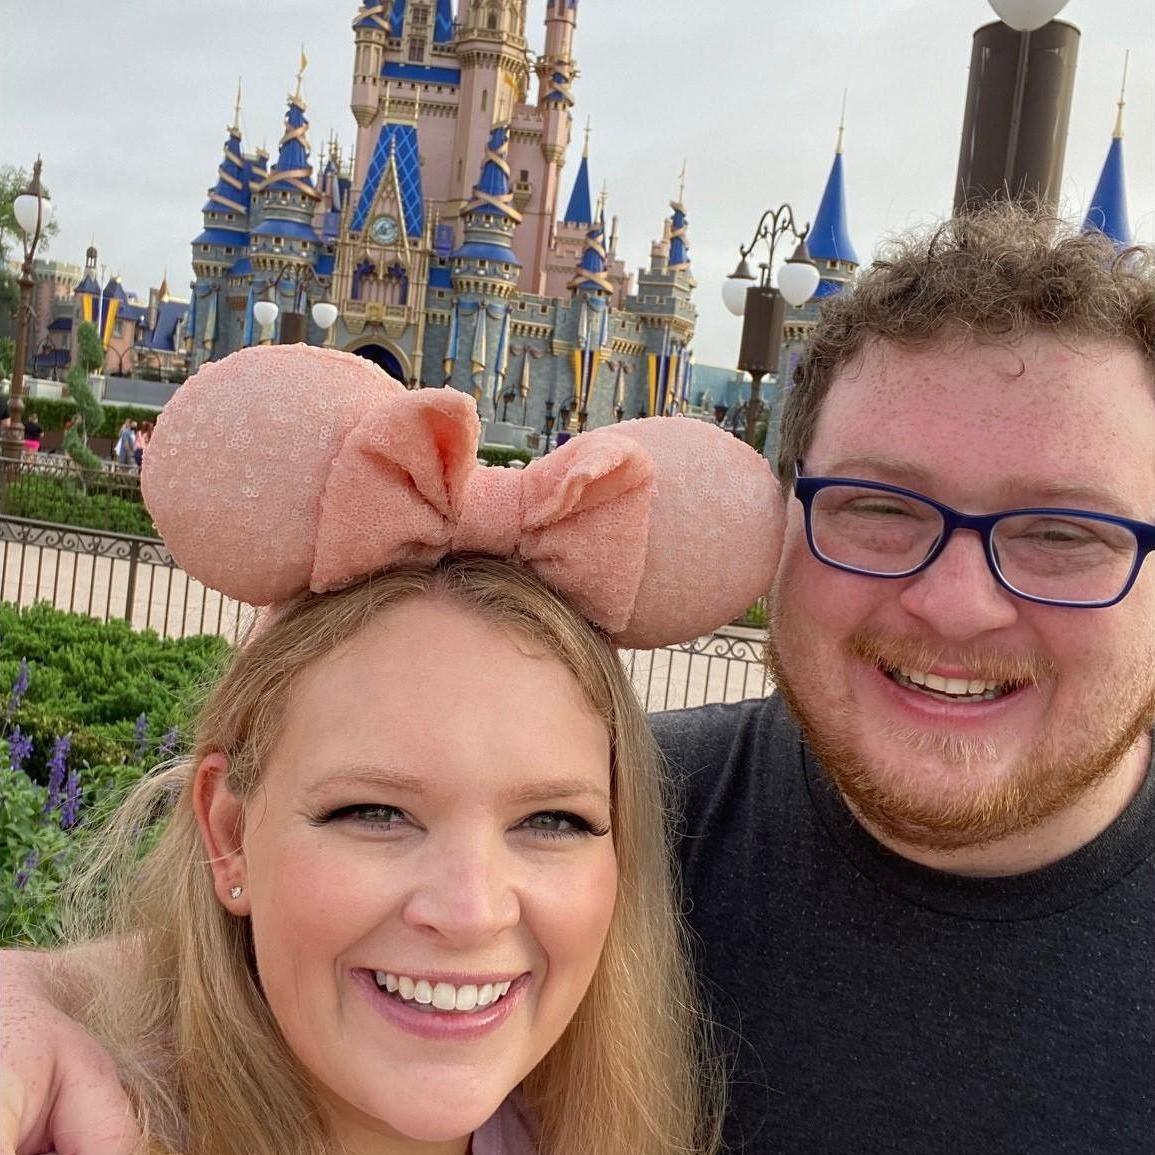 Our first trip to Disney